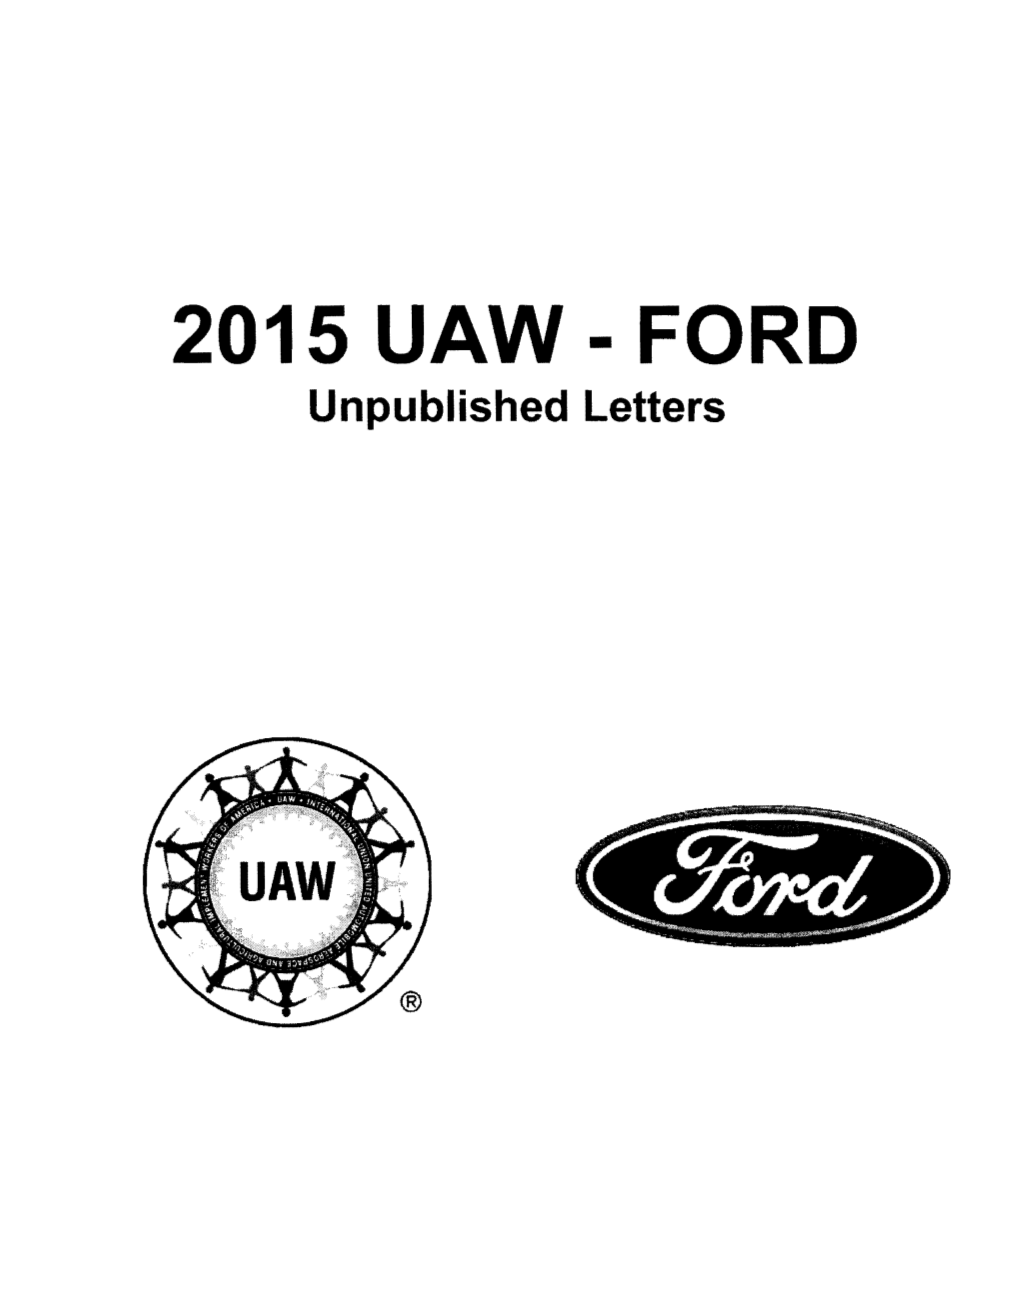 2015 UAW-FORD Unpublished Letters